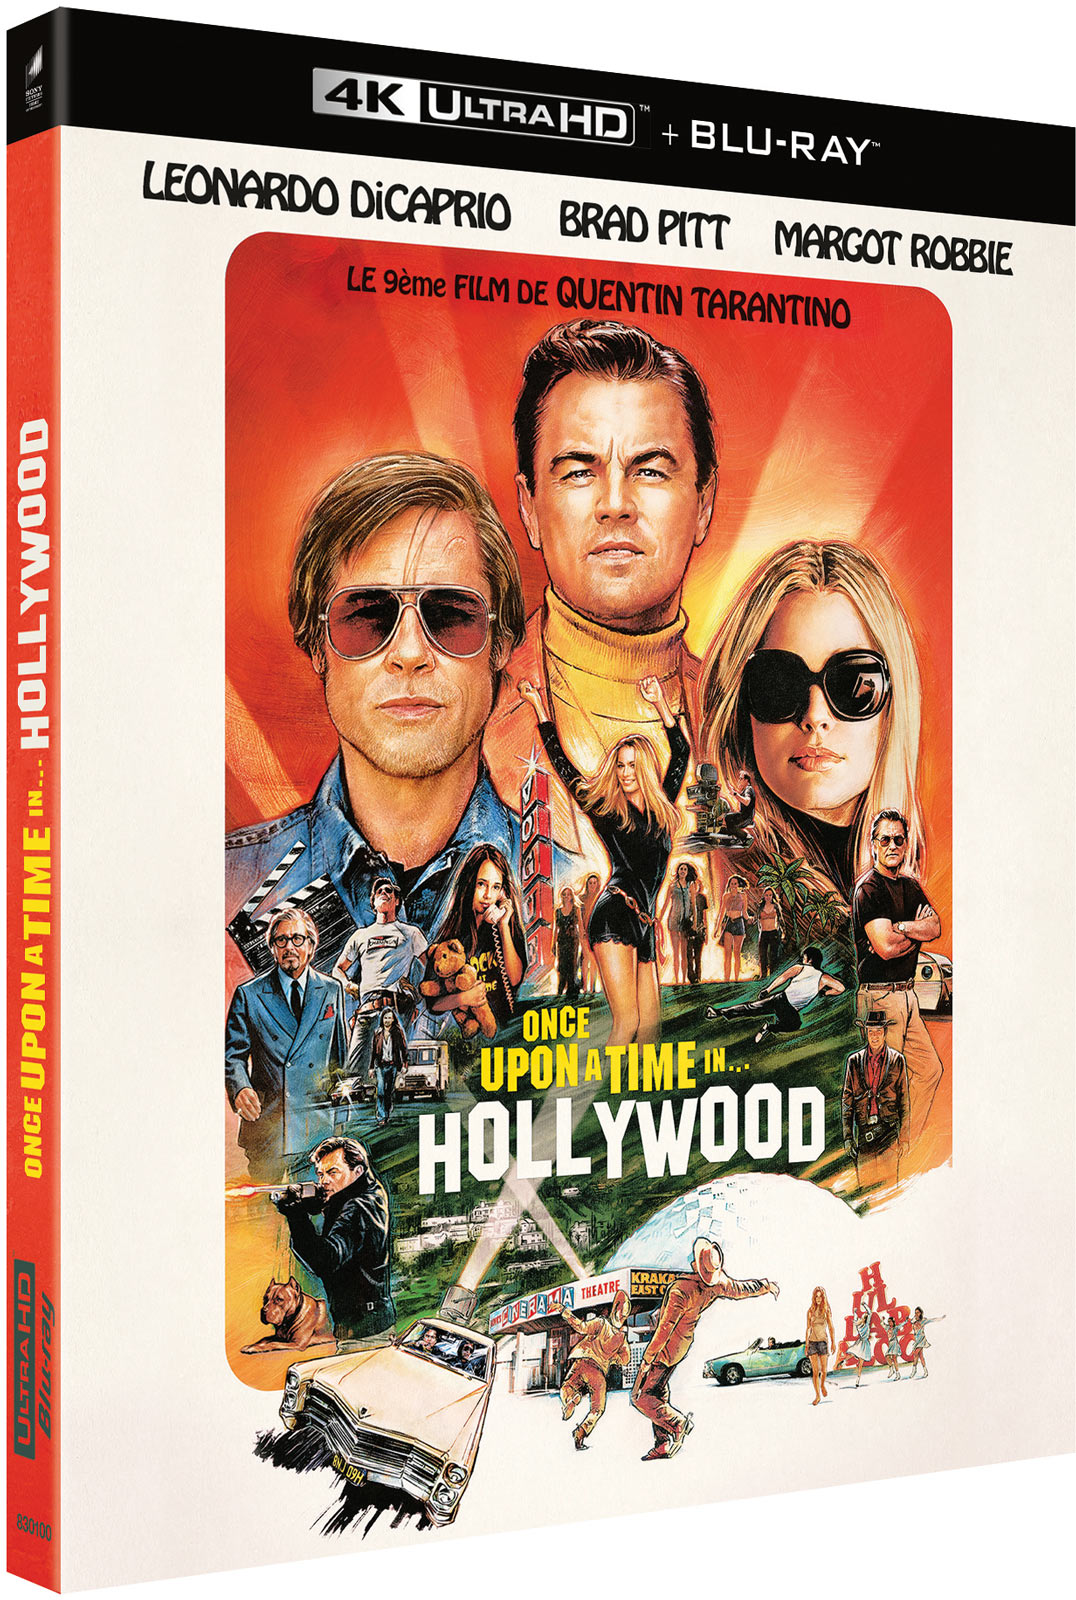 ONCE UPON A TIME IN... HOLLYWOOD - UHD 4K + BD